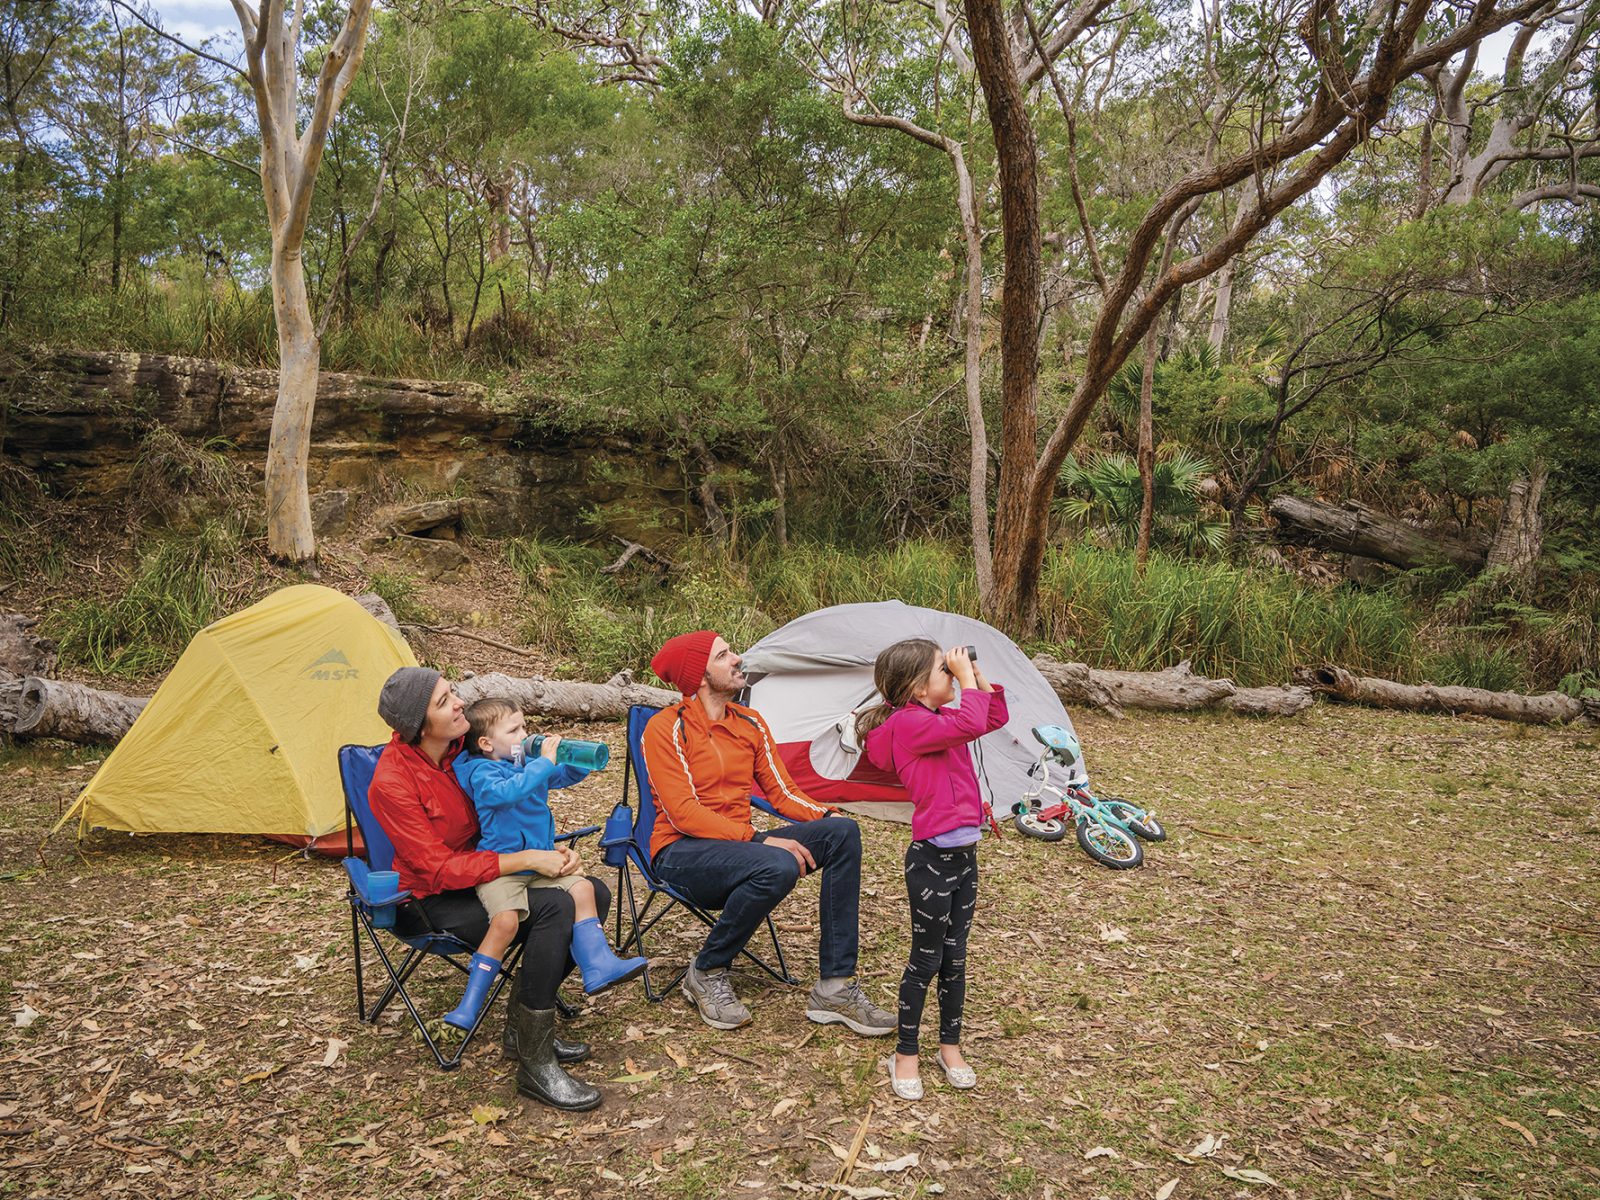 A family with two parents and two young kids Birdwatching, Royal National Park. Photo credit : John Spencer / DPIE